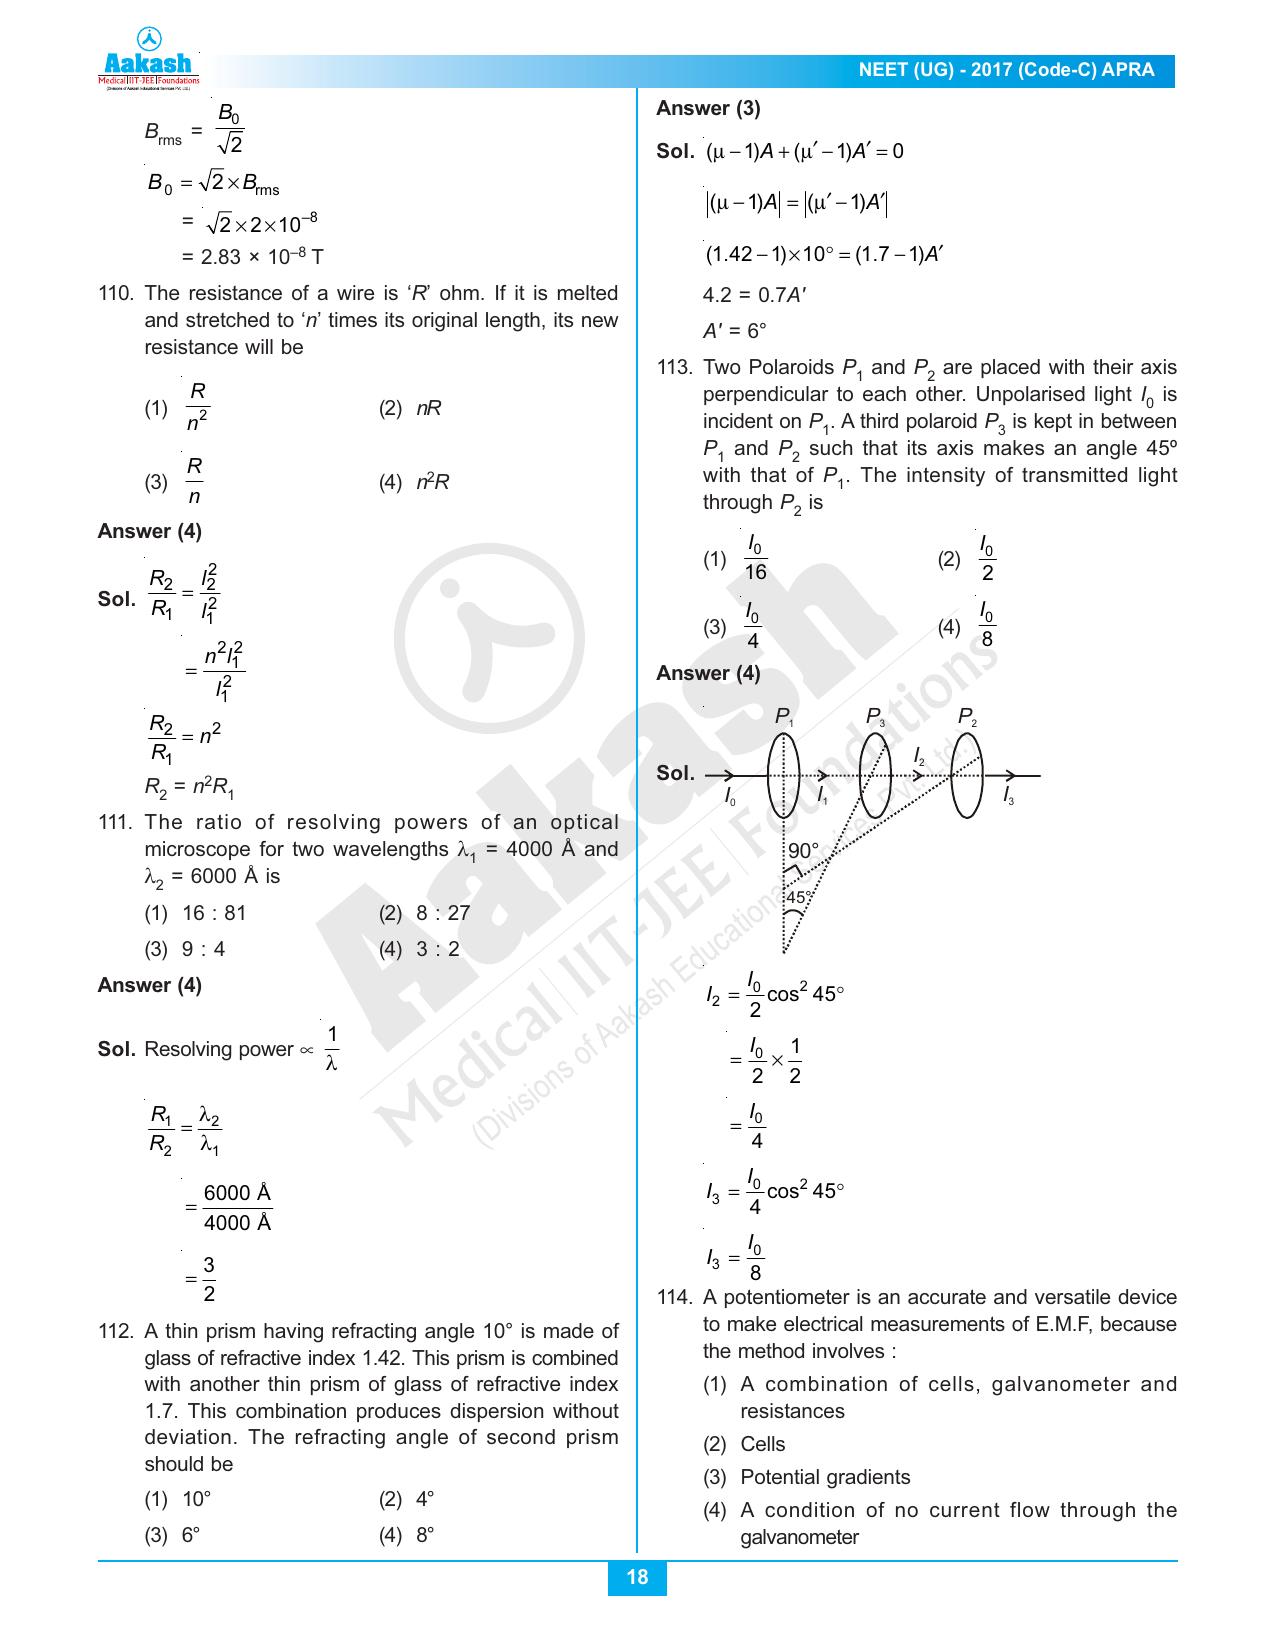  NEET Code C 2017 Answer & Solutions - Page 18